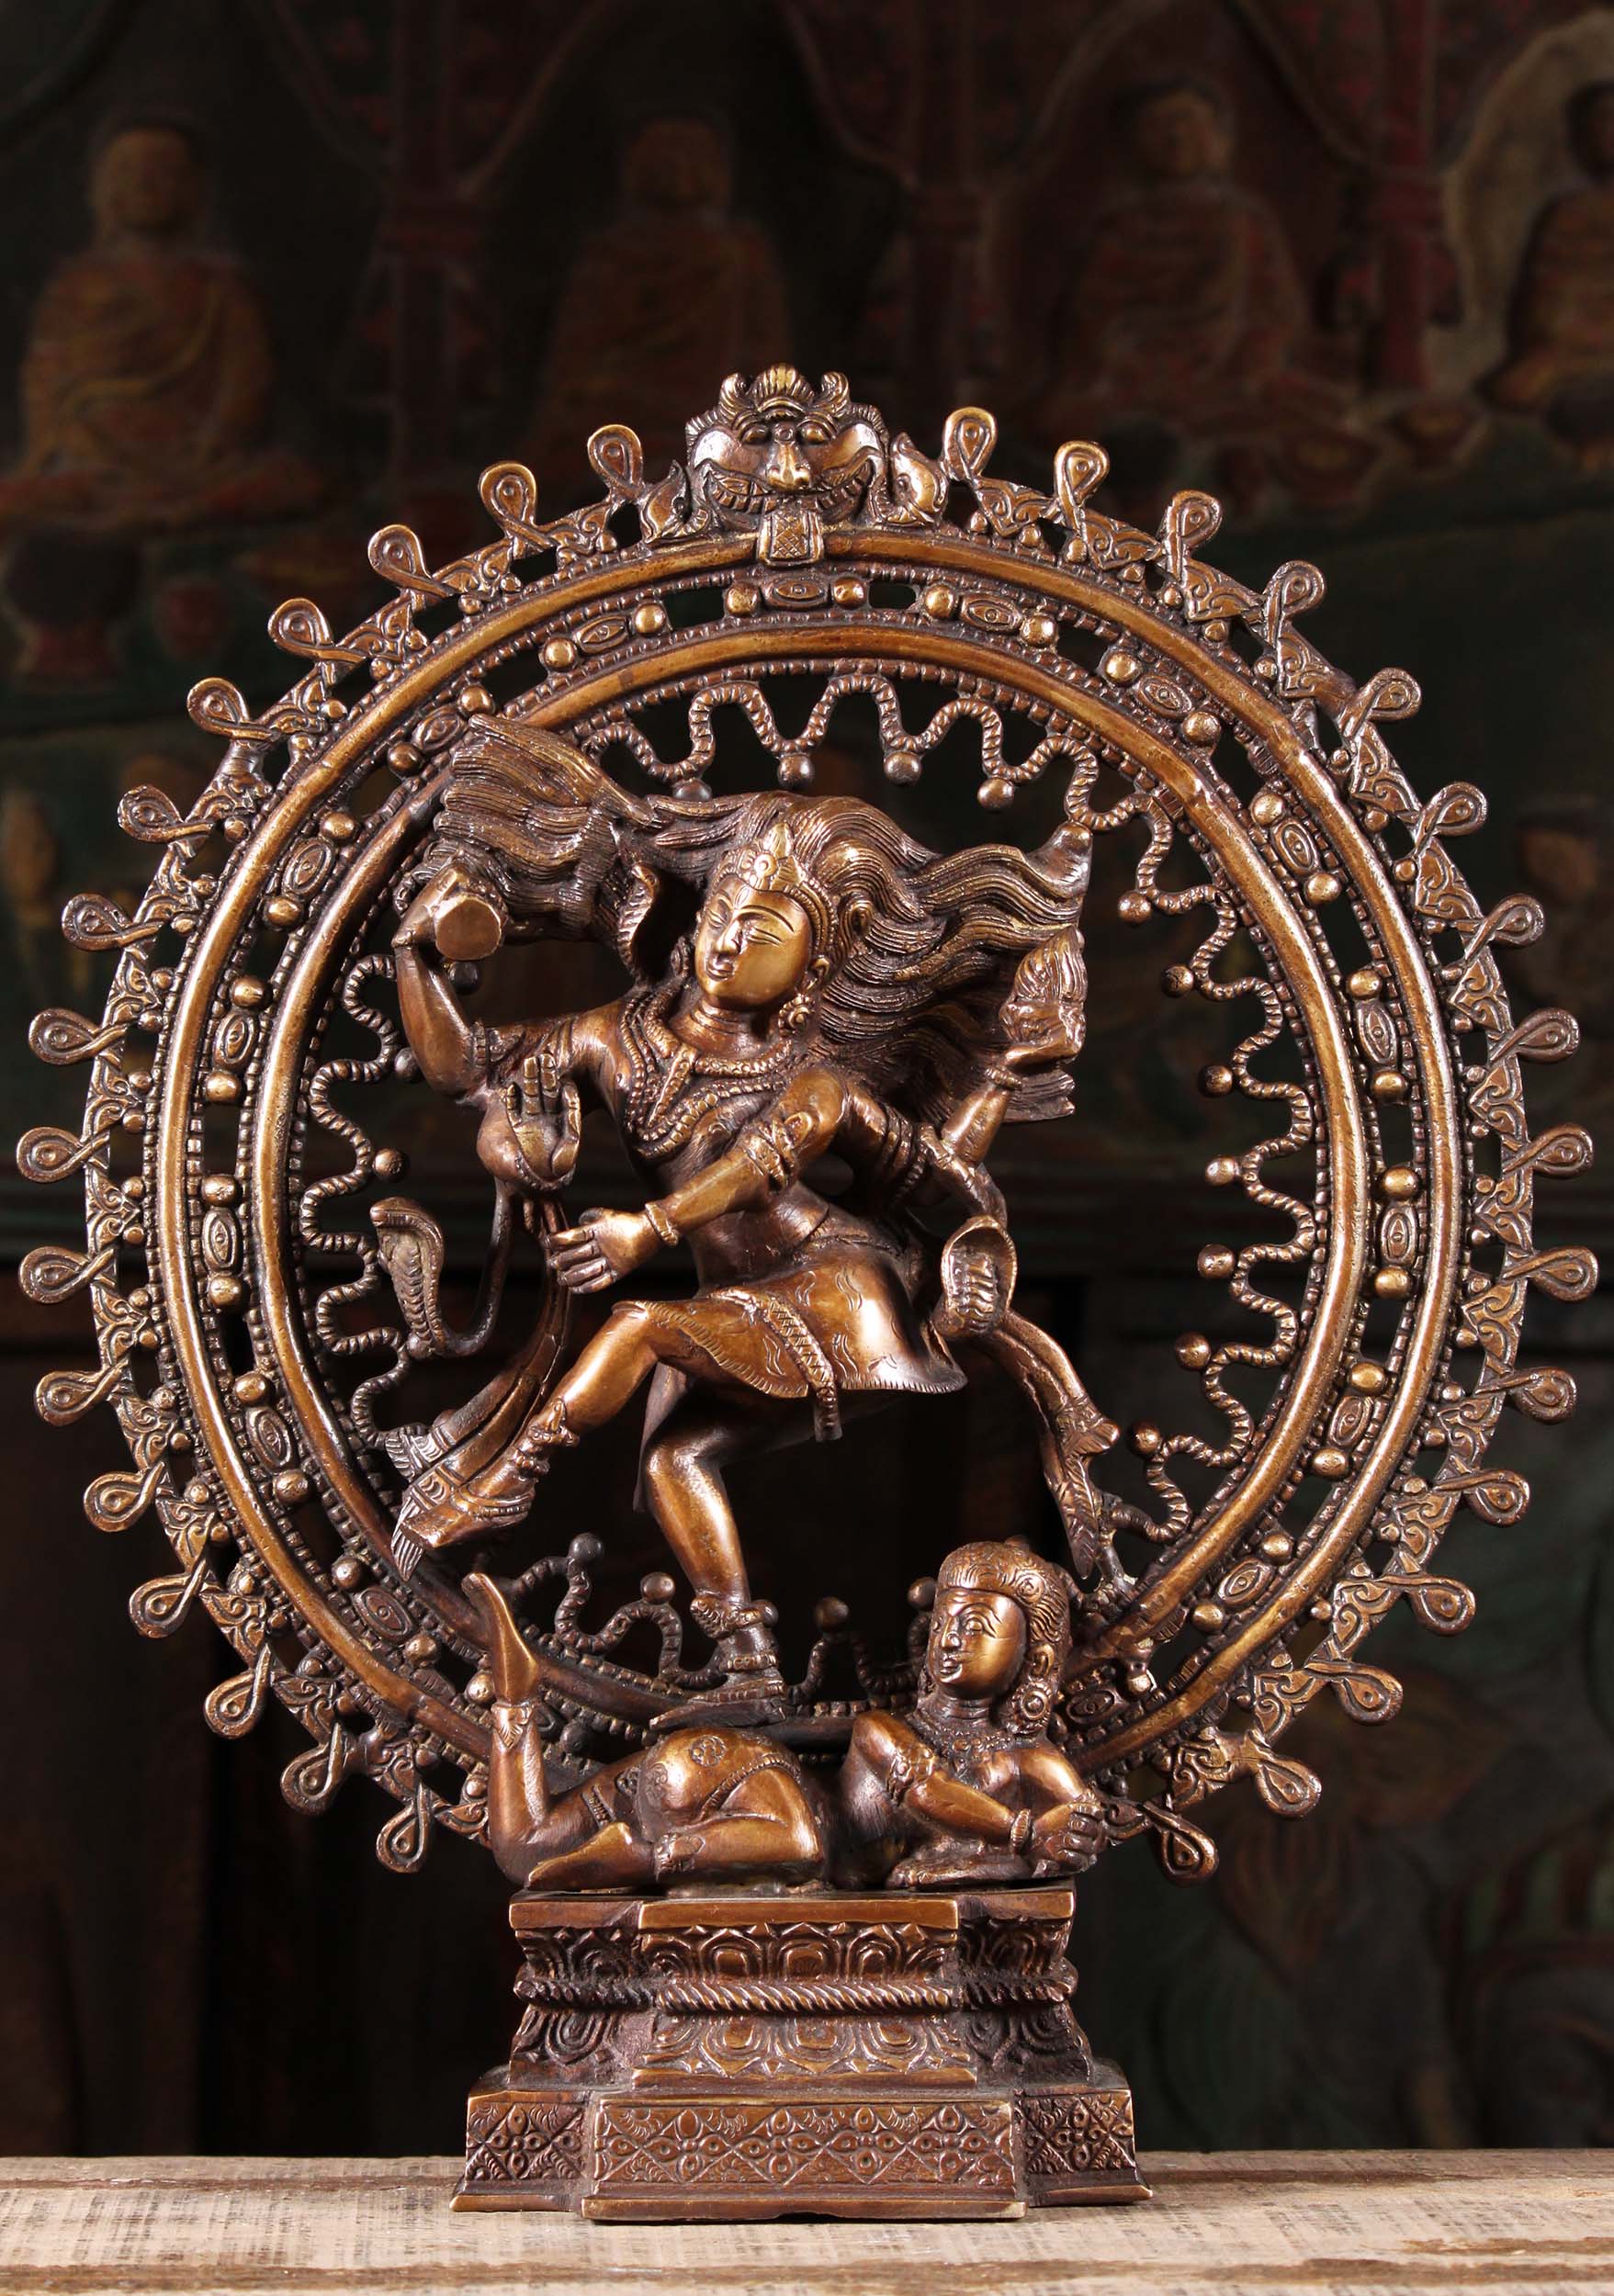 How the Nataraja made its way from India to the West